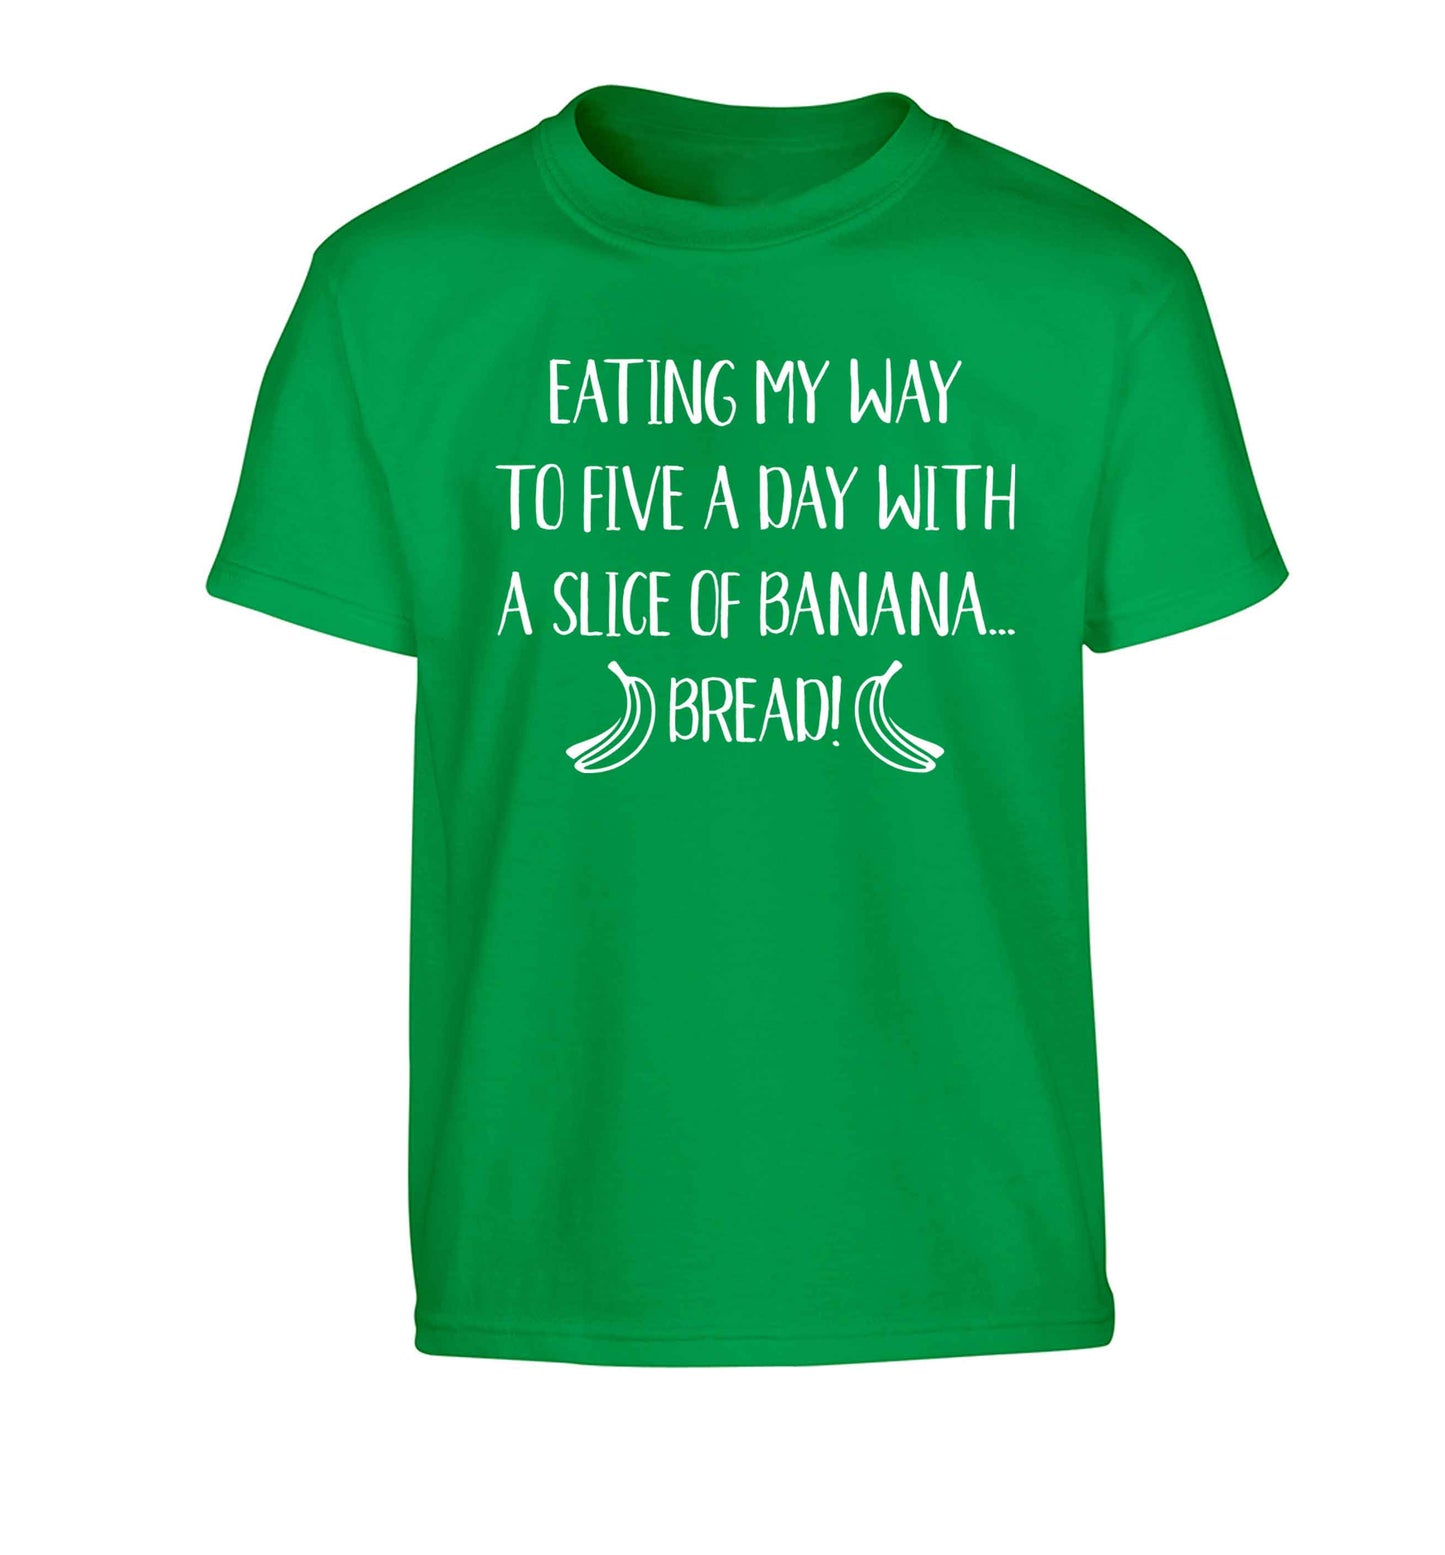 Eating my way to five a day with a slice of banana bread Children's green Tshirt 12-13 Years